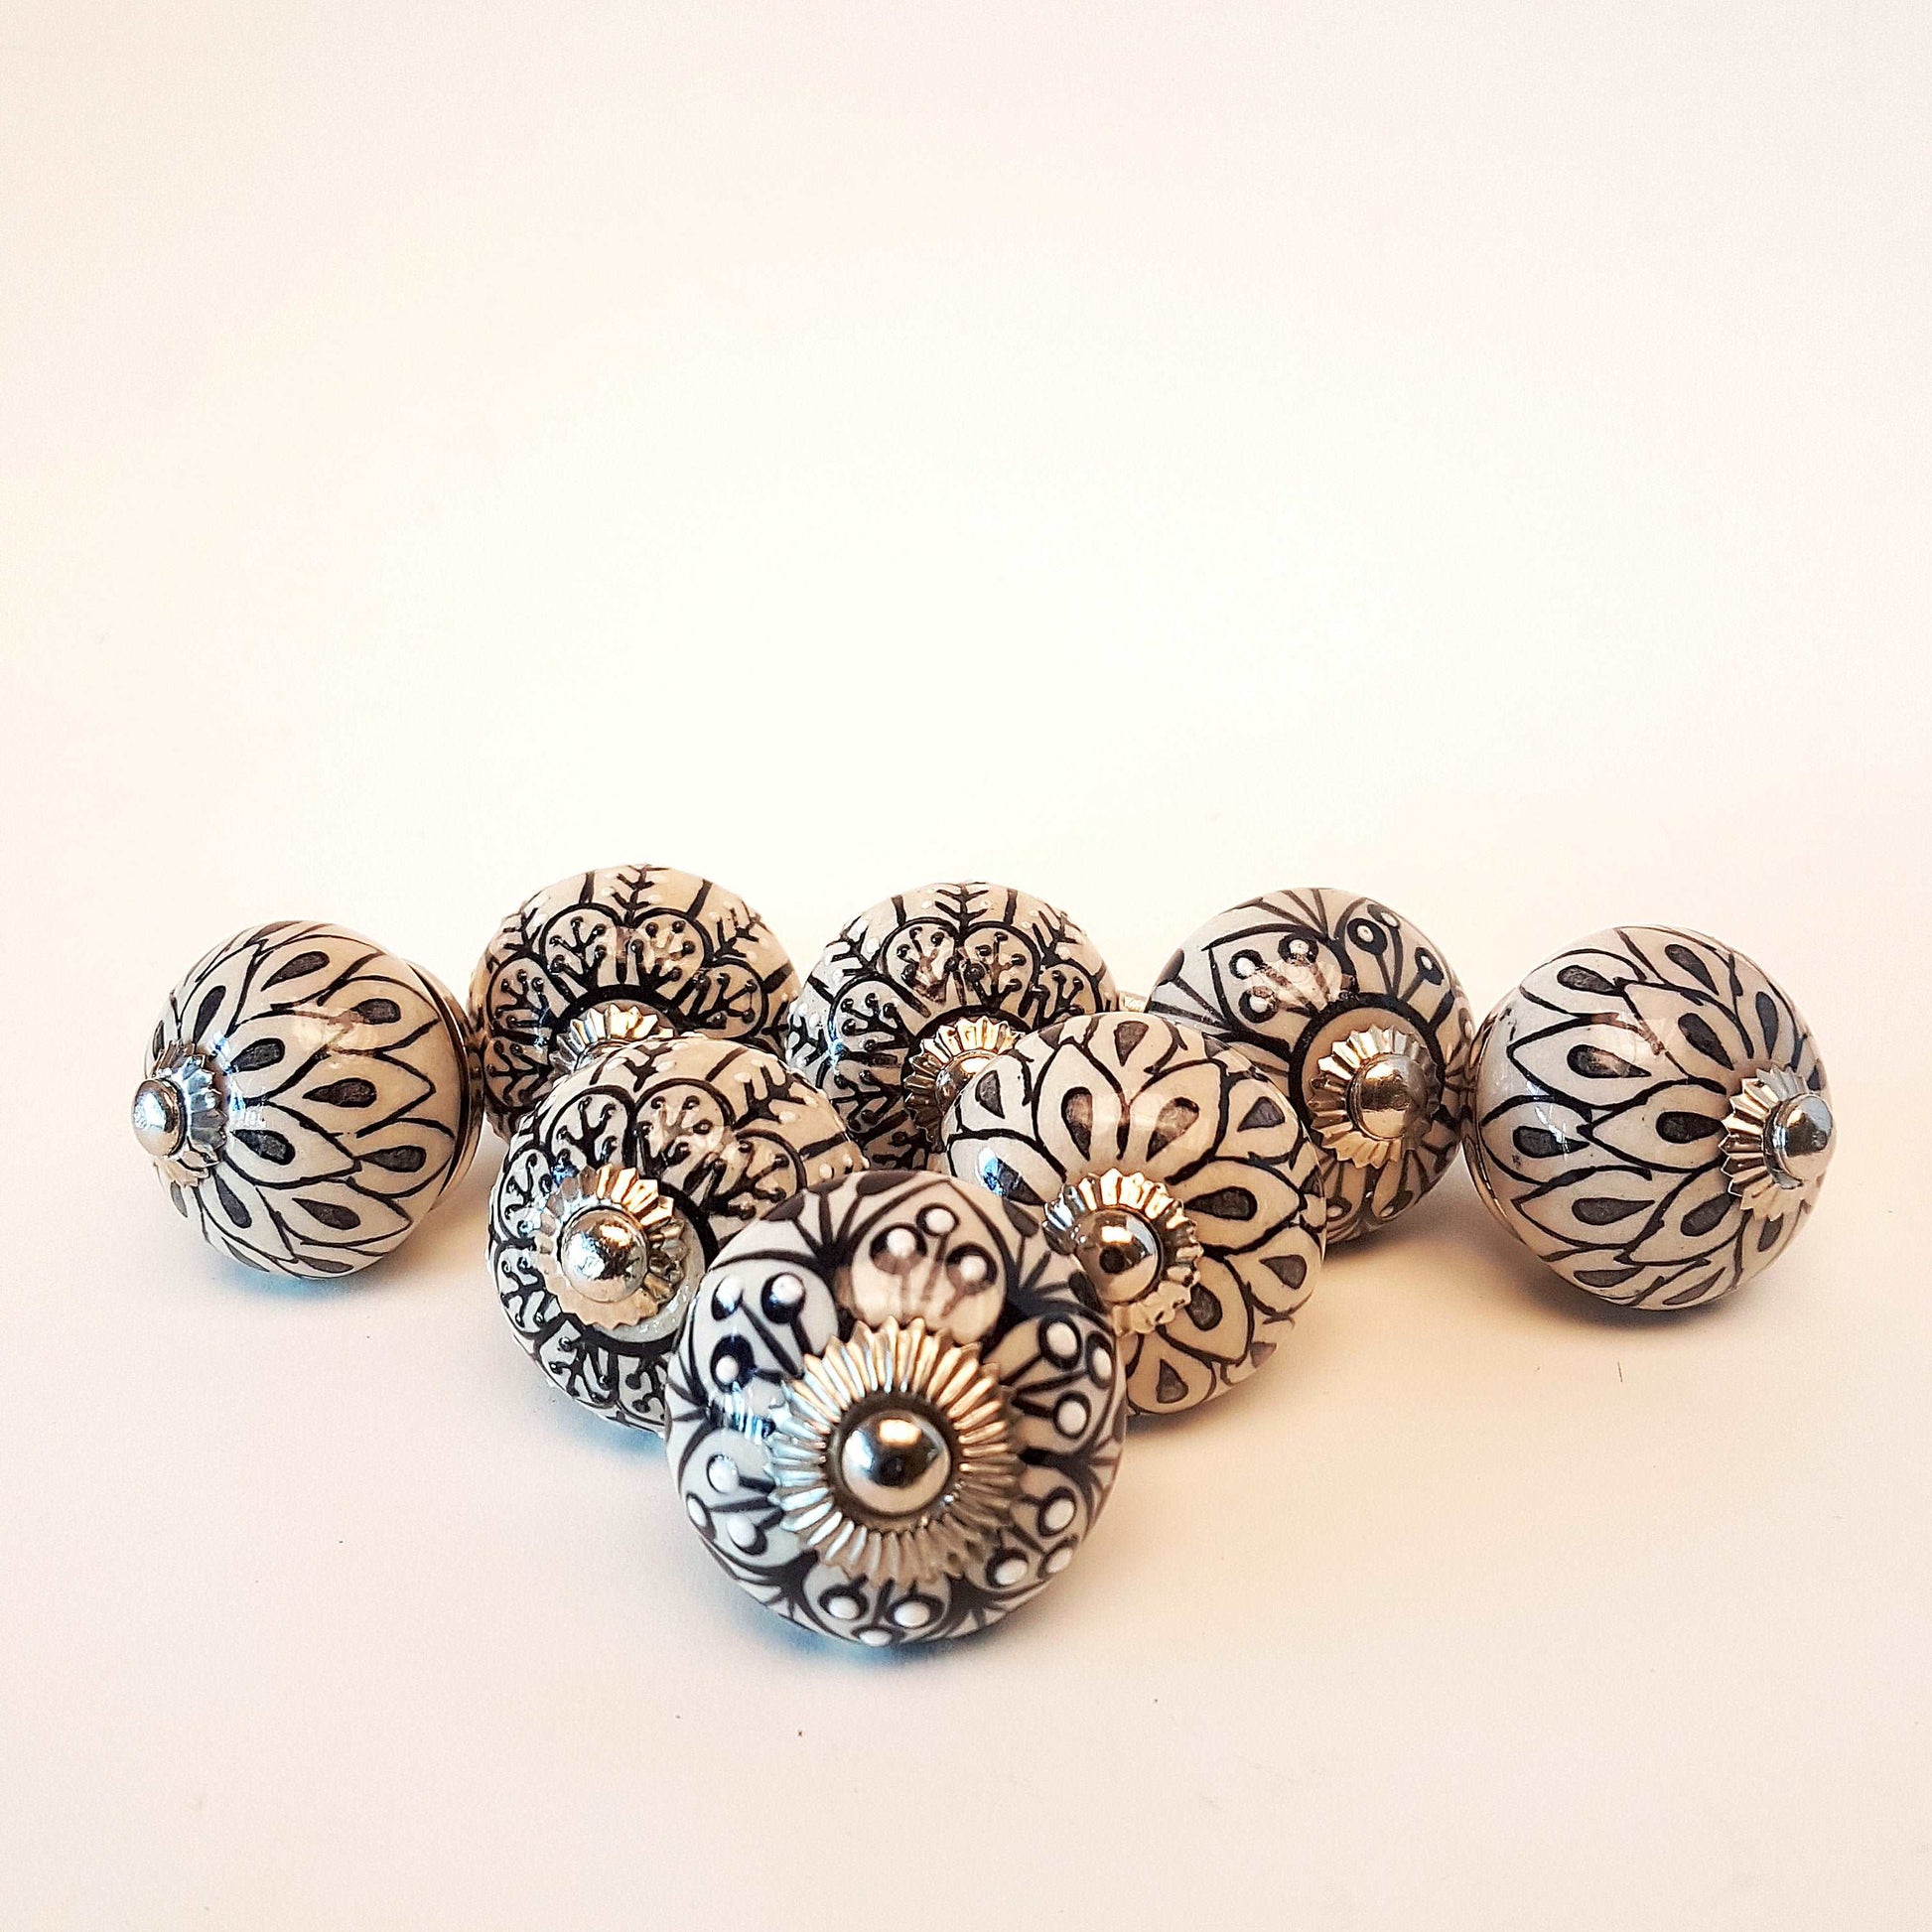 8 cabinet knob-drawer pulls in black, slate grey and cream.  Elegance hand painted floral designs with silver hardware.1.5 inch in diameter. - Vintage India Ca